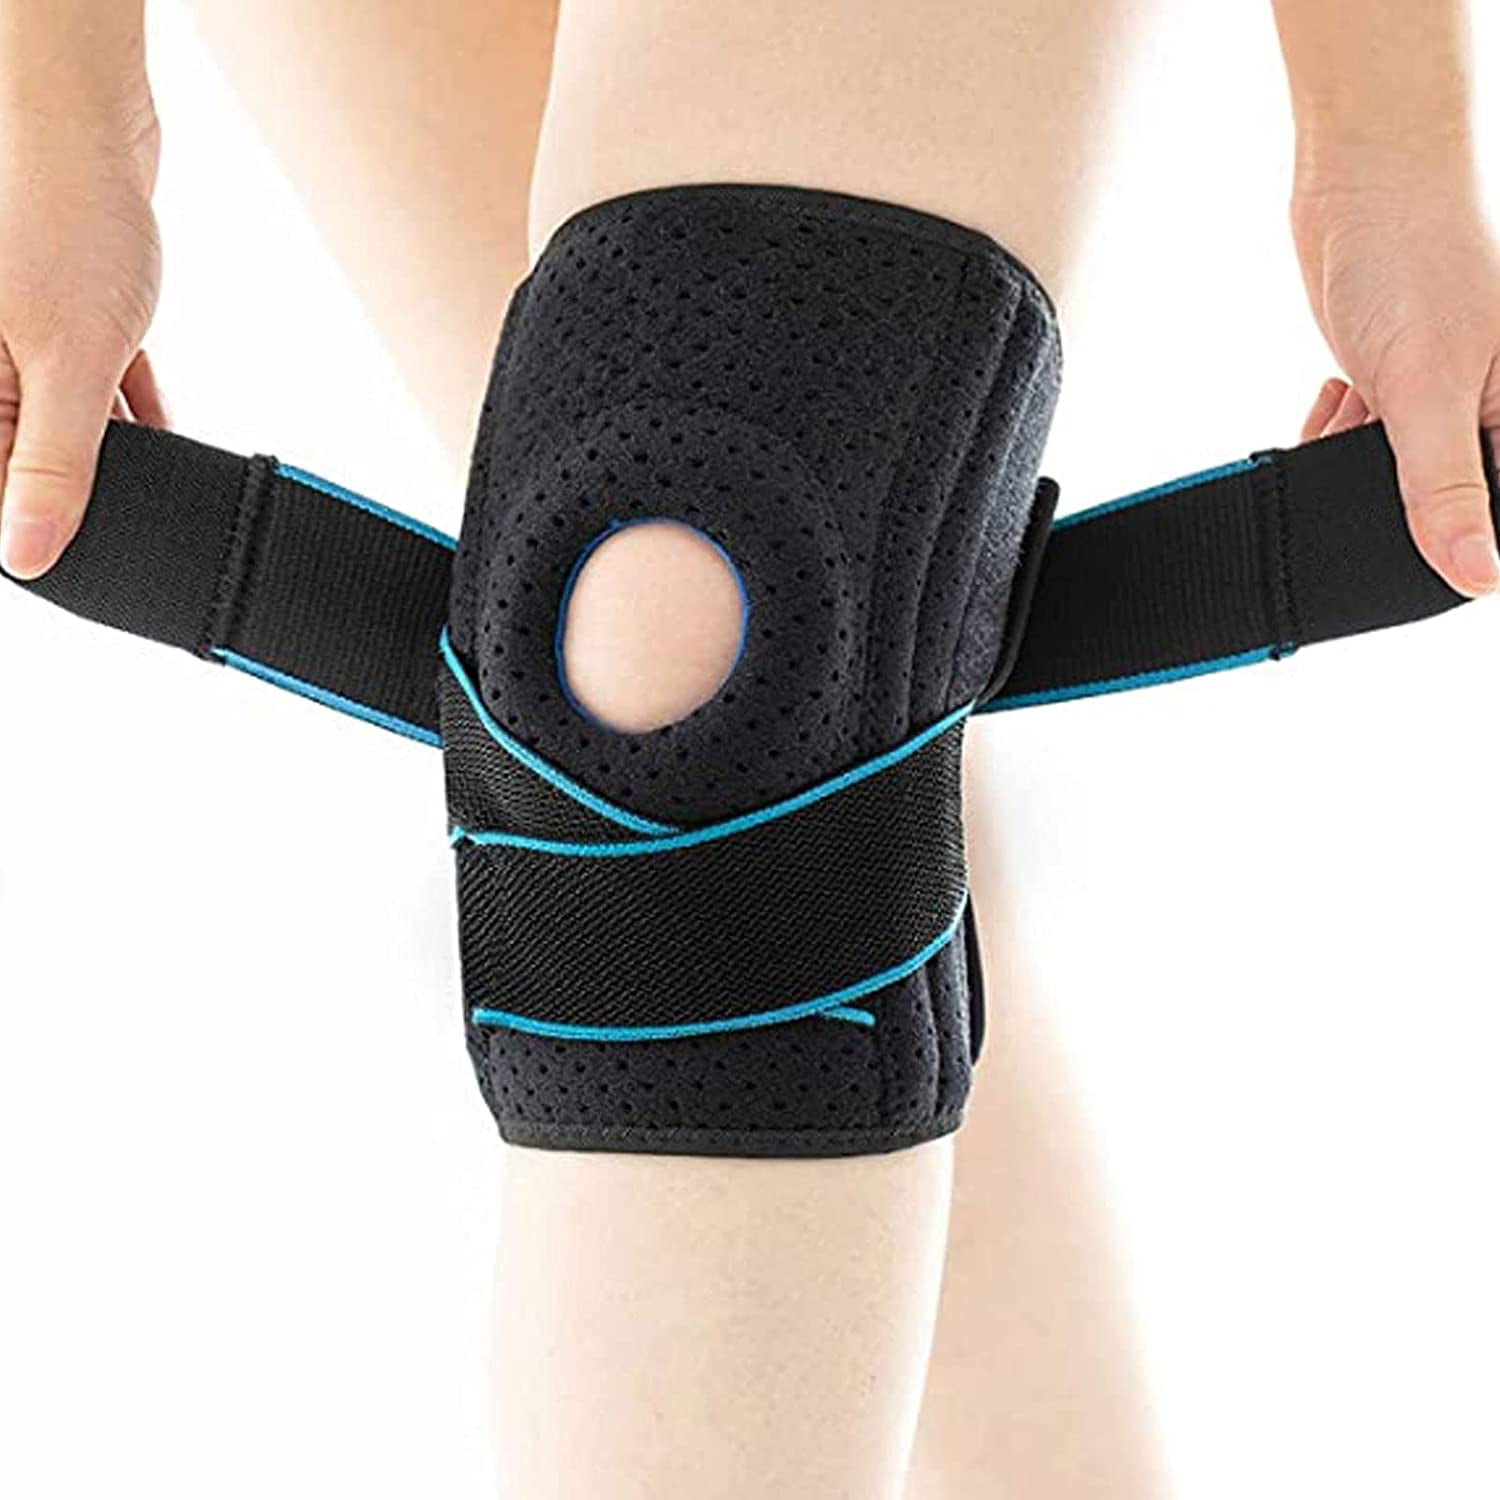 ACL Meniscus Tears Sprains Ligament Injuries Adjustable Open Patella Stabilizer for Sports Trauma A Pair,S Arthritis Knee Brace Support Women Men 